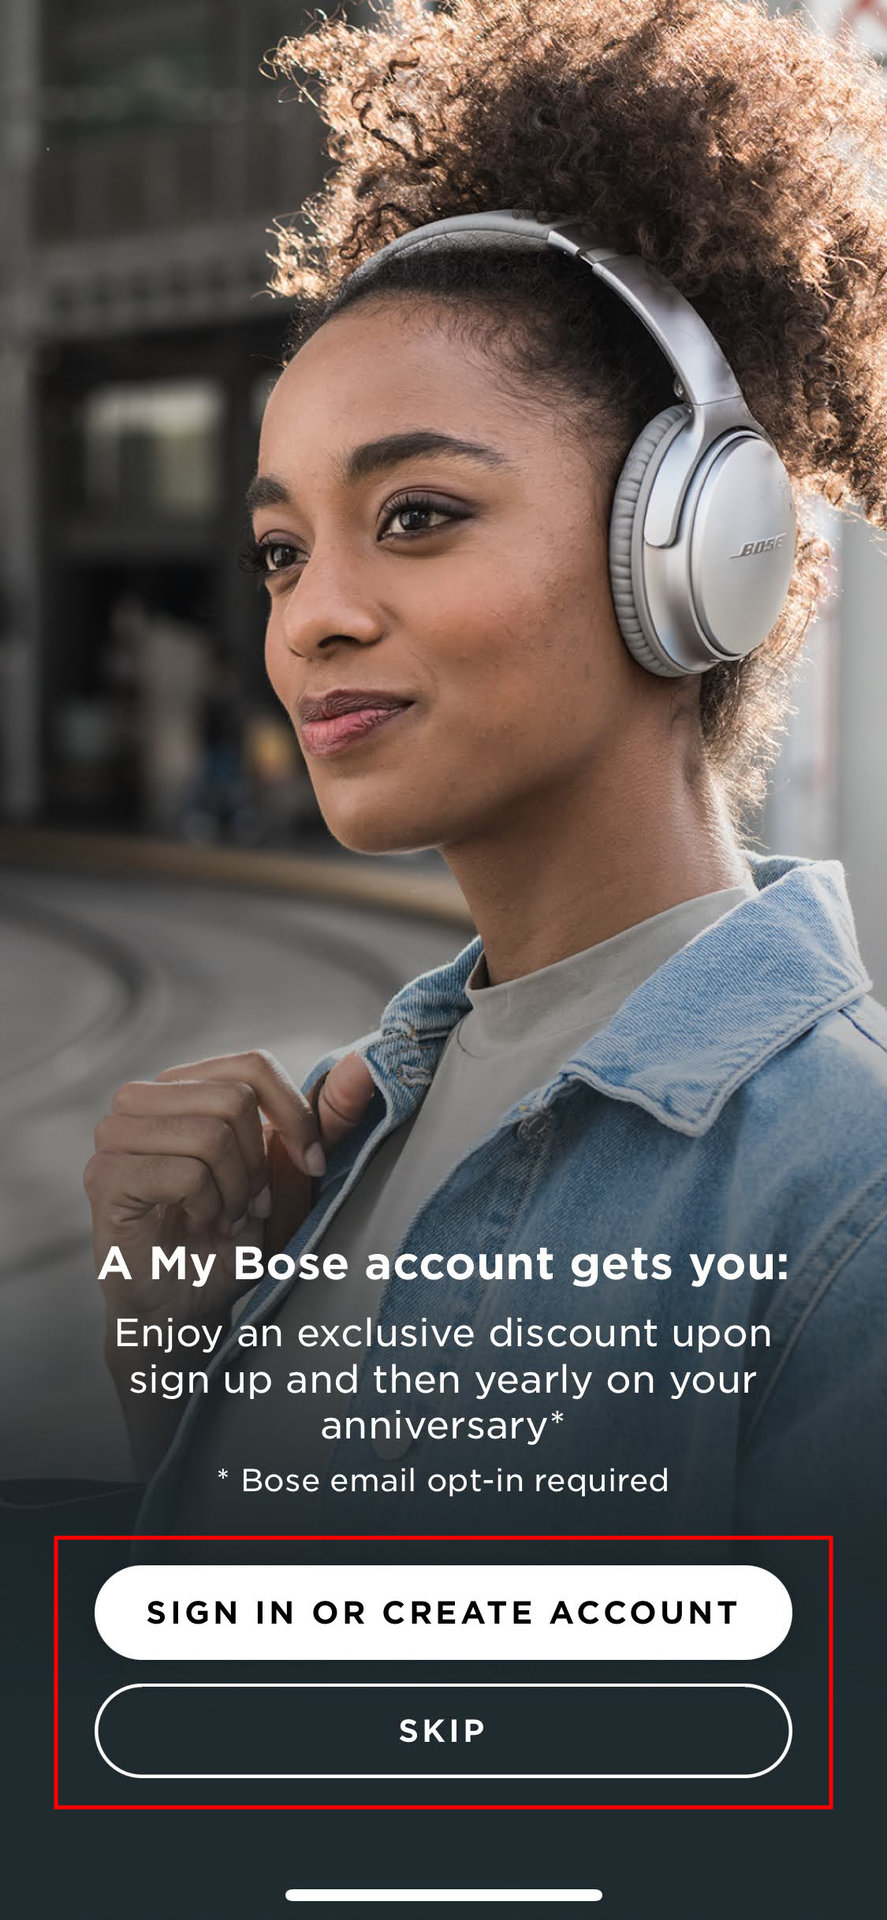 How to pair Bose headphones to an iPhone by using the Bose Connect app (1)